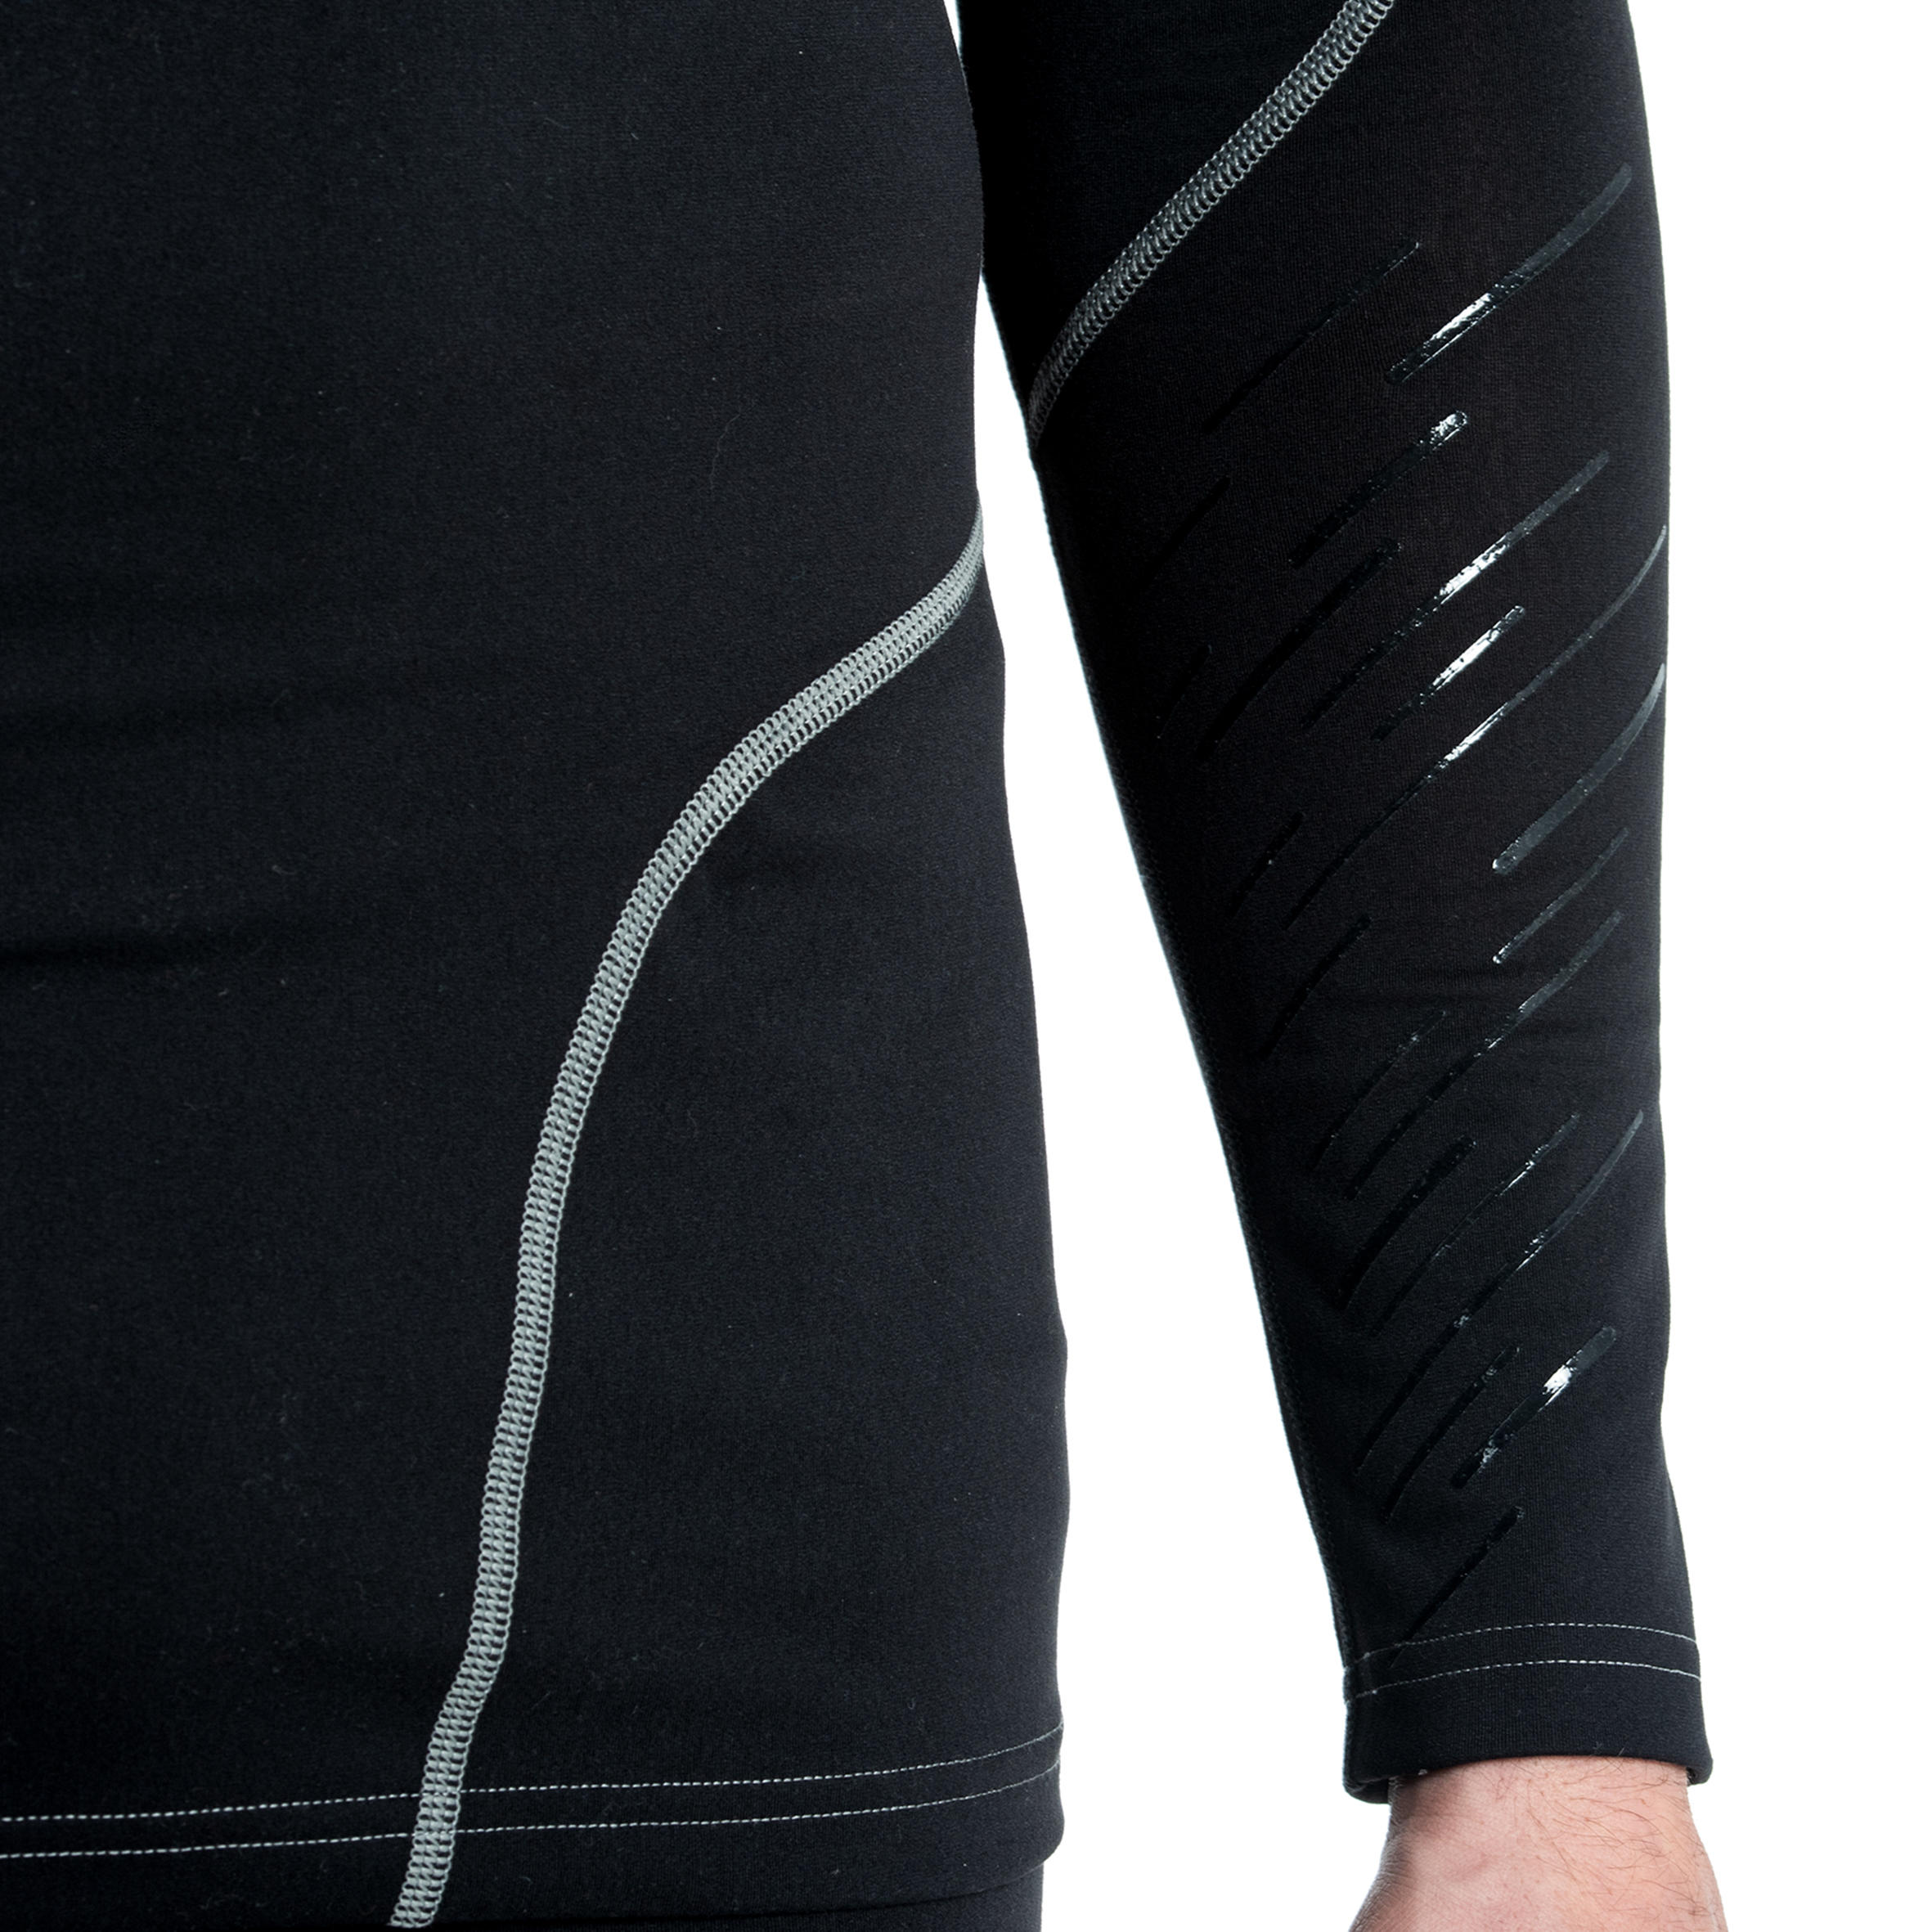 Men's Long-Sleeved Rugby Base Layer Top R500 - Black 2/10